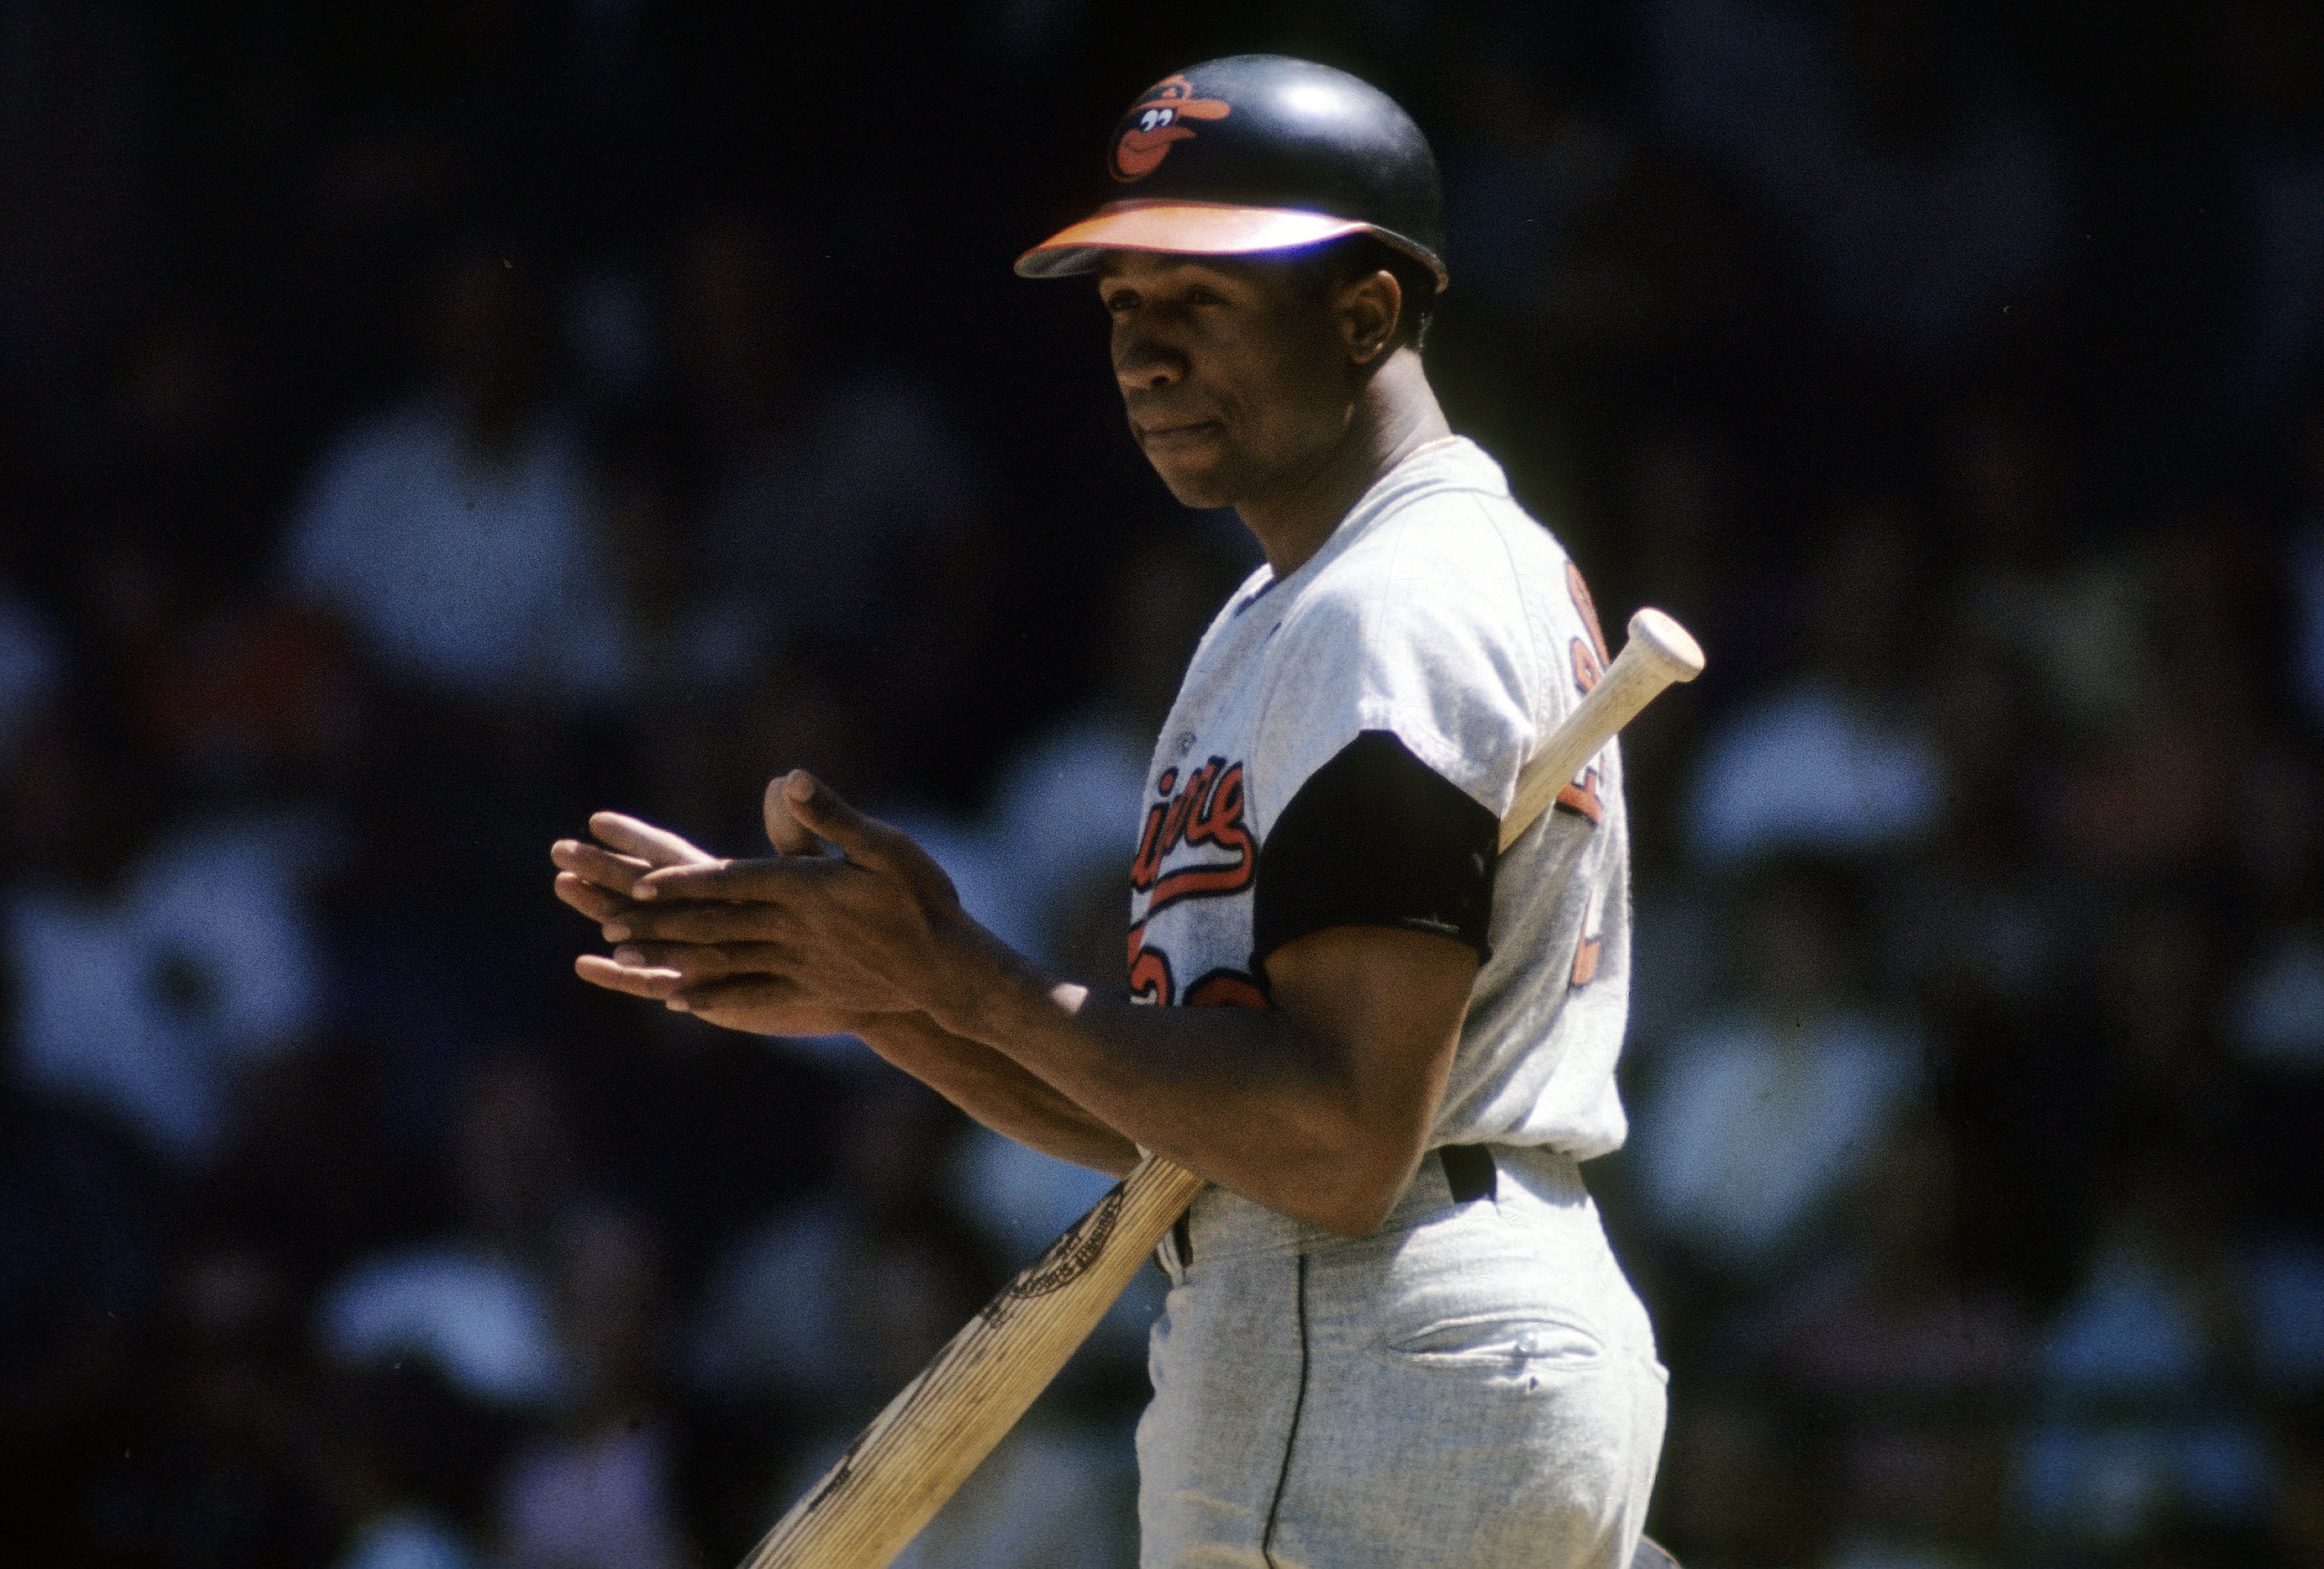 CIRCA 1960s: Outfielder Frank Robinson #20 of the Baltimore Orioles at the plate getting signals from the 3rd base coach during  a circa late 1960s Major League Baseball game. Robinson played for the Orioles from 1966-71. (Photo by Focus on Sport/Getty Images)